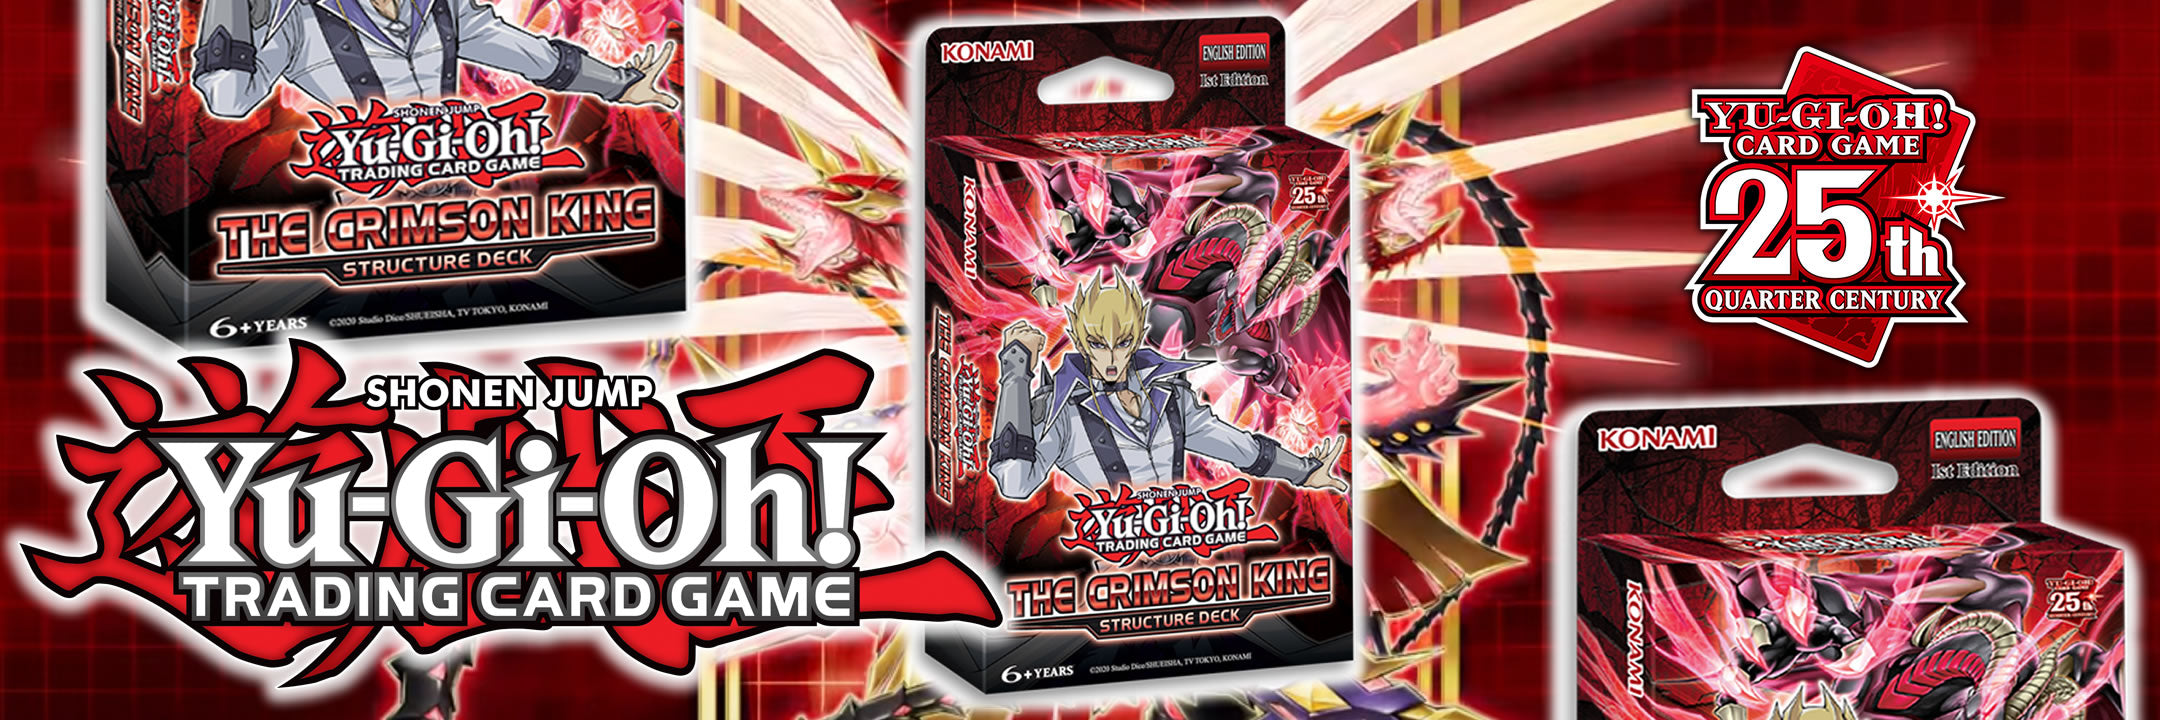 Yu-Gi-Oh! Trading Card Game - The Crimson King Structure Deck